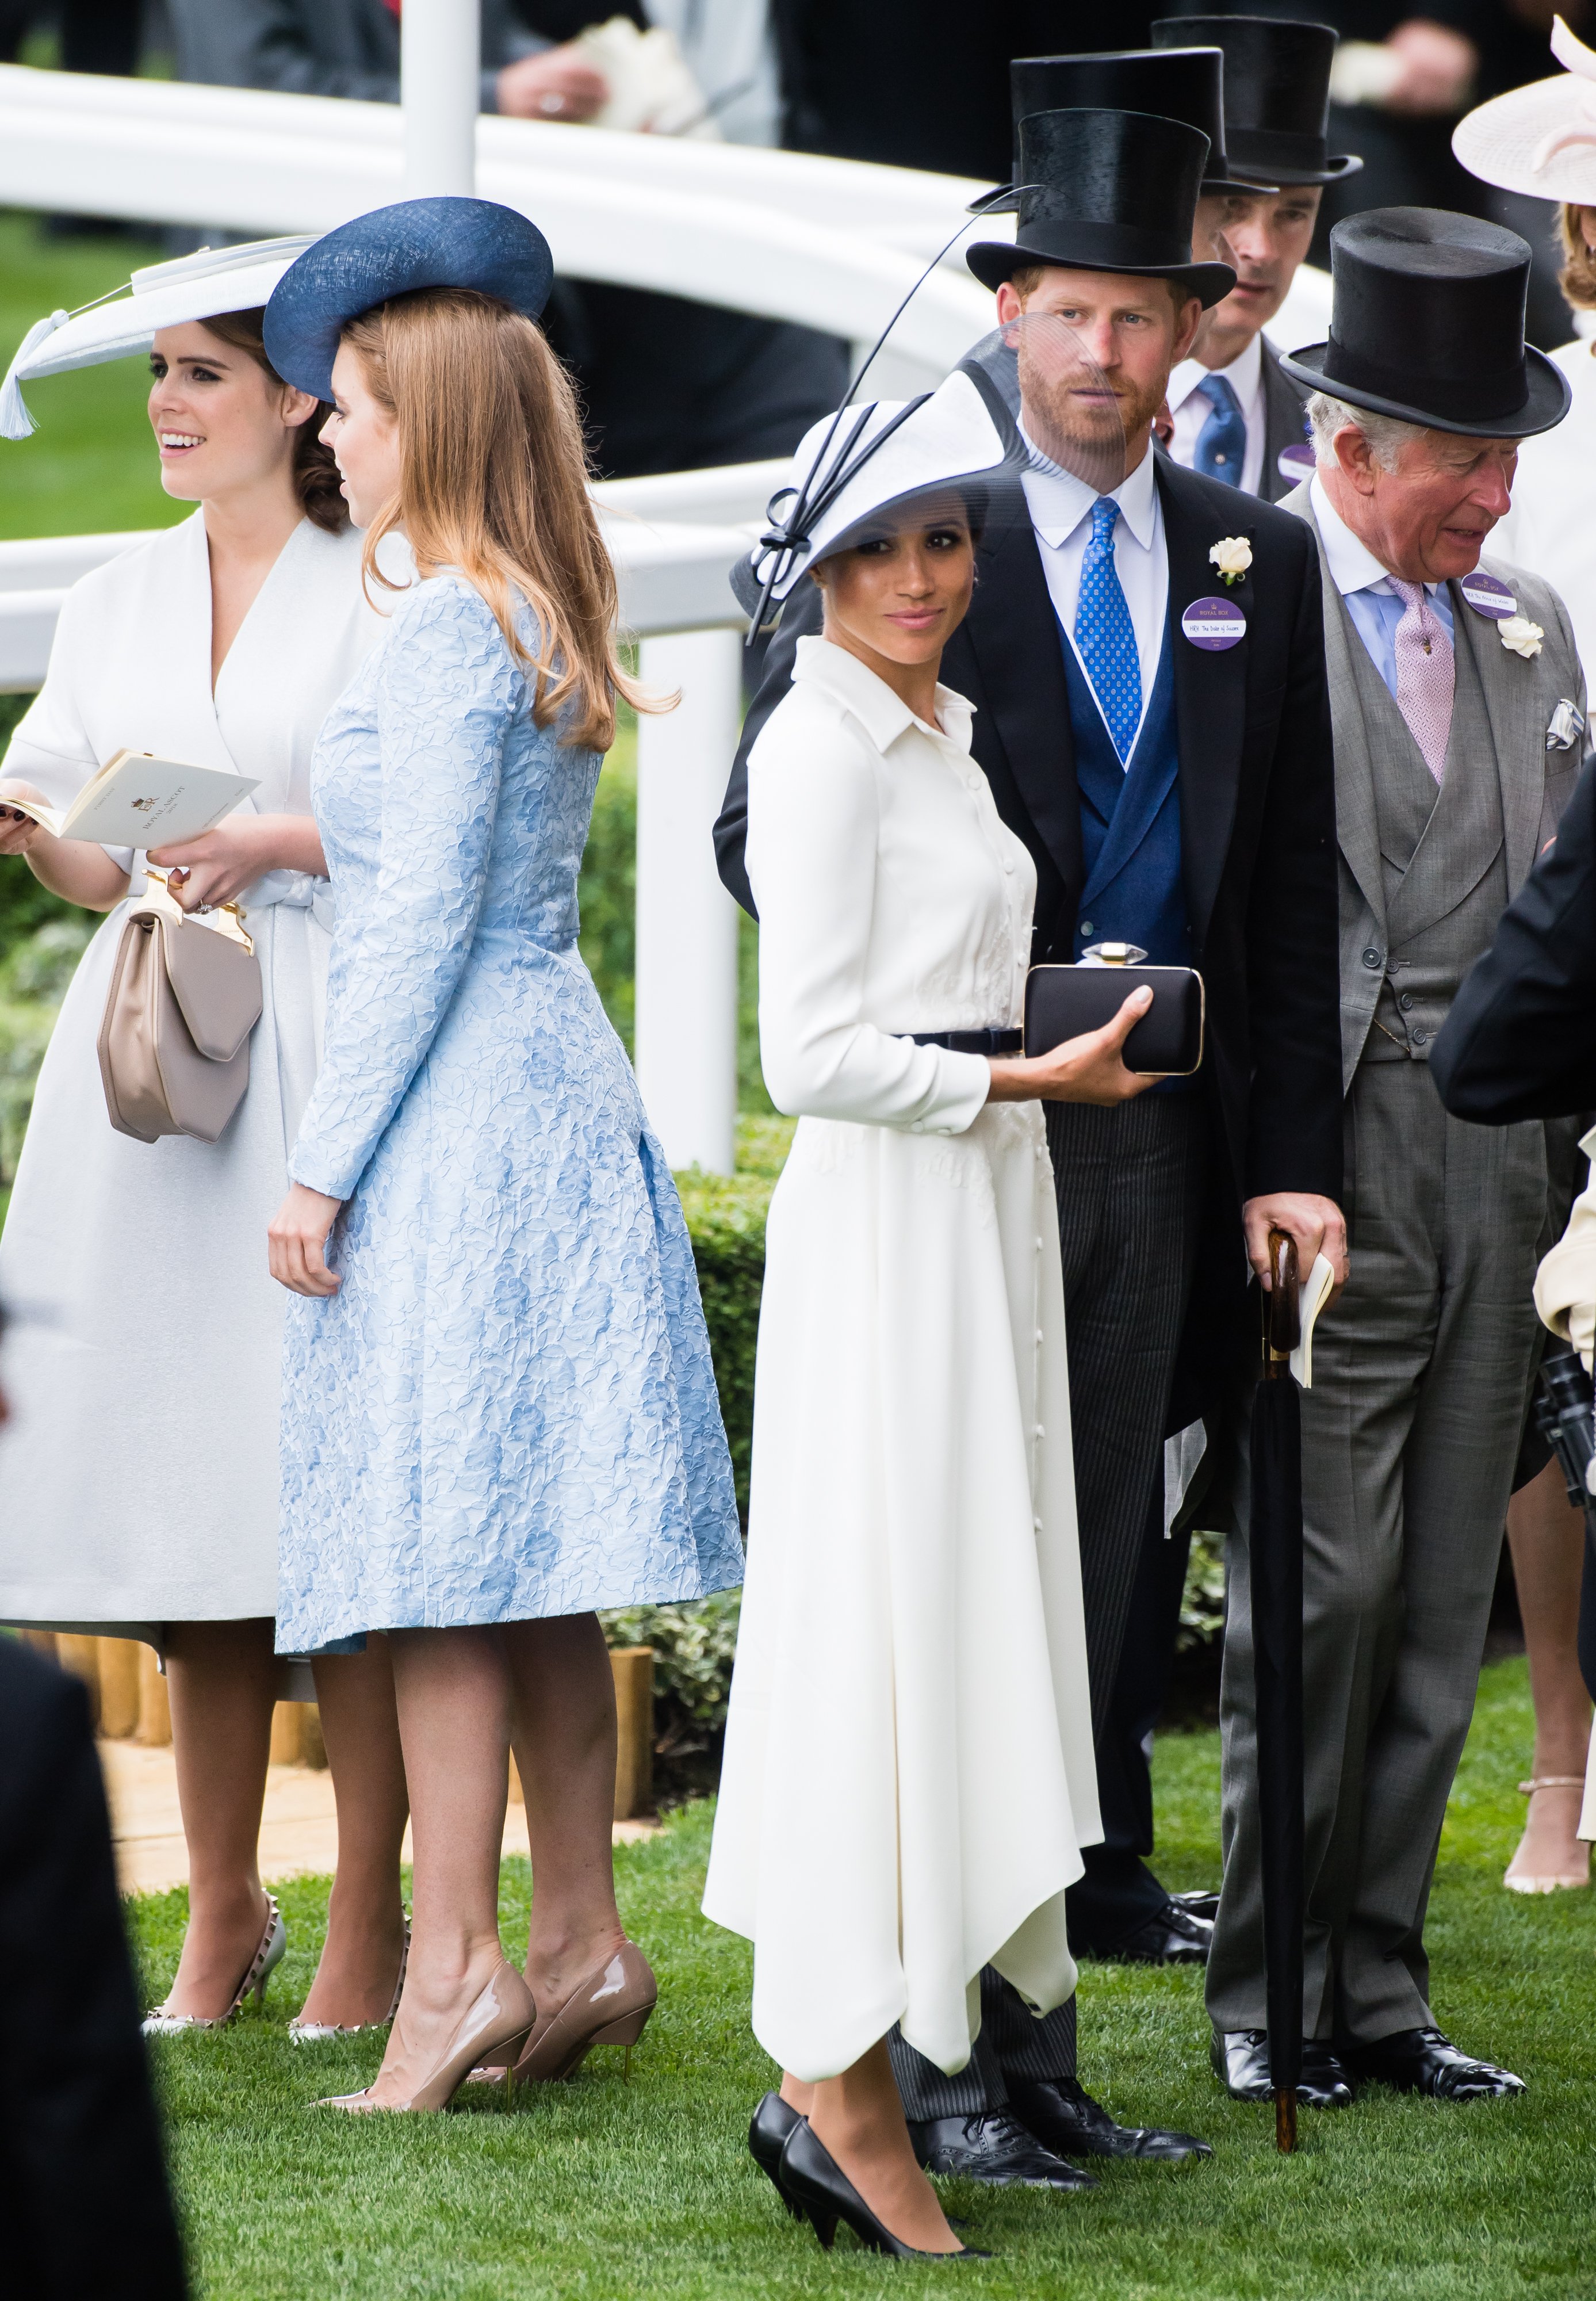 Princess Eugenie of York, Princess Beatrice of York, Meghan, Duchess of Sussex and Prince Harry, Duke of Sussex and Prince Charles, Prince of Wales attend Royal Ascot Day 1 at Ascot Racecourse on June 19, 2018 in Ascot, United Kingdom | Source: Getty Images